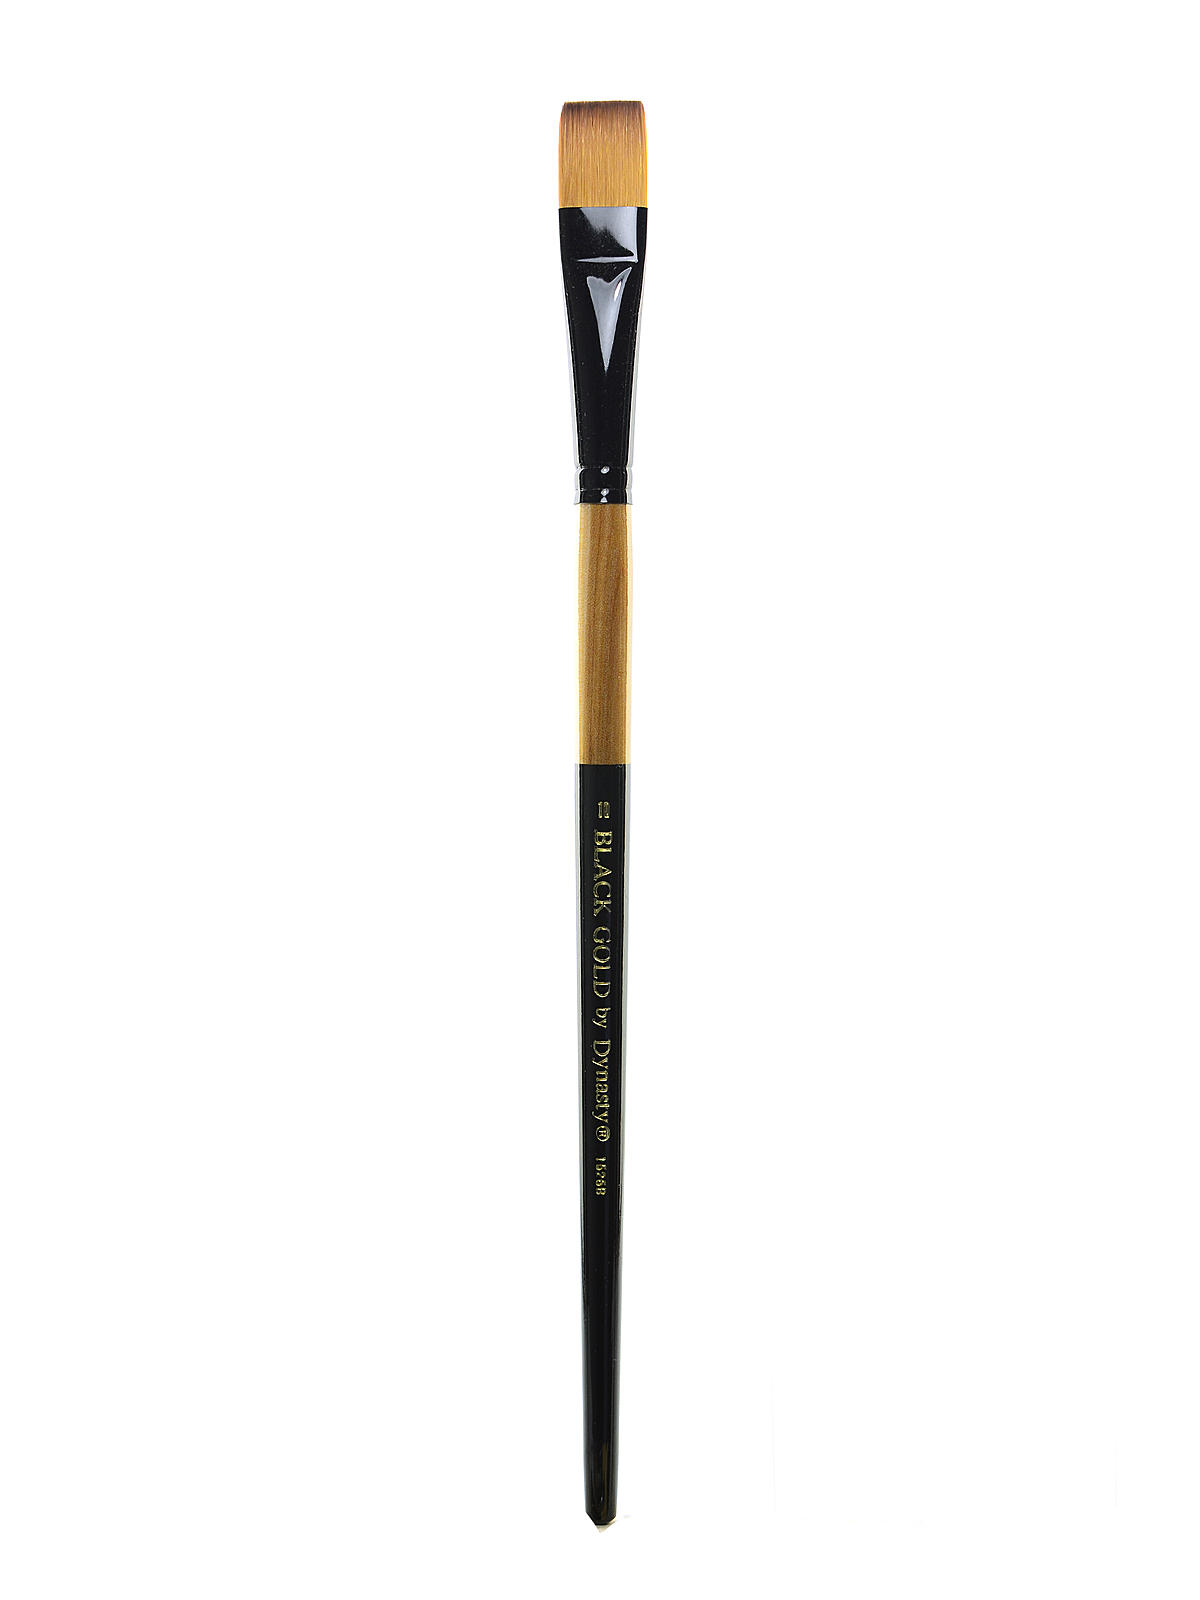 Black Gold Series Long Handled Synthetic Brushes 10 Bright 1526b